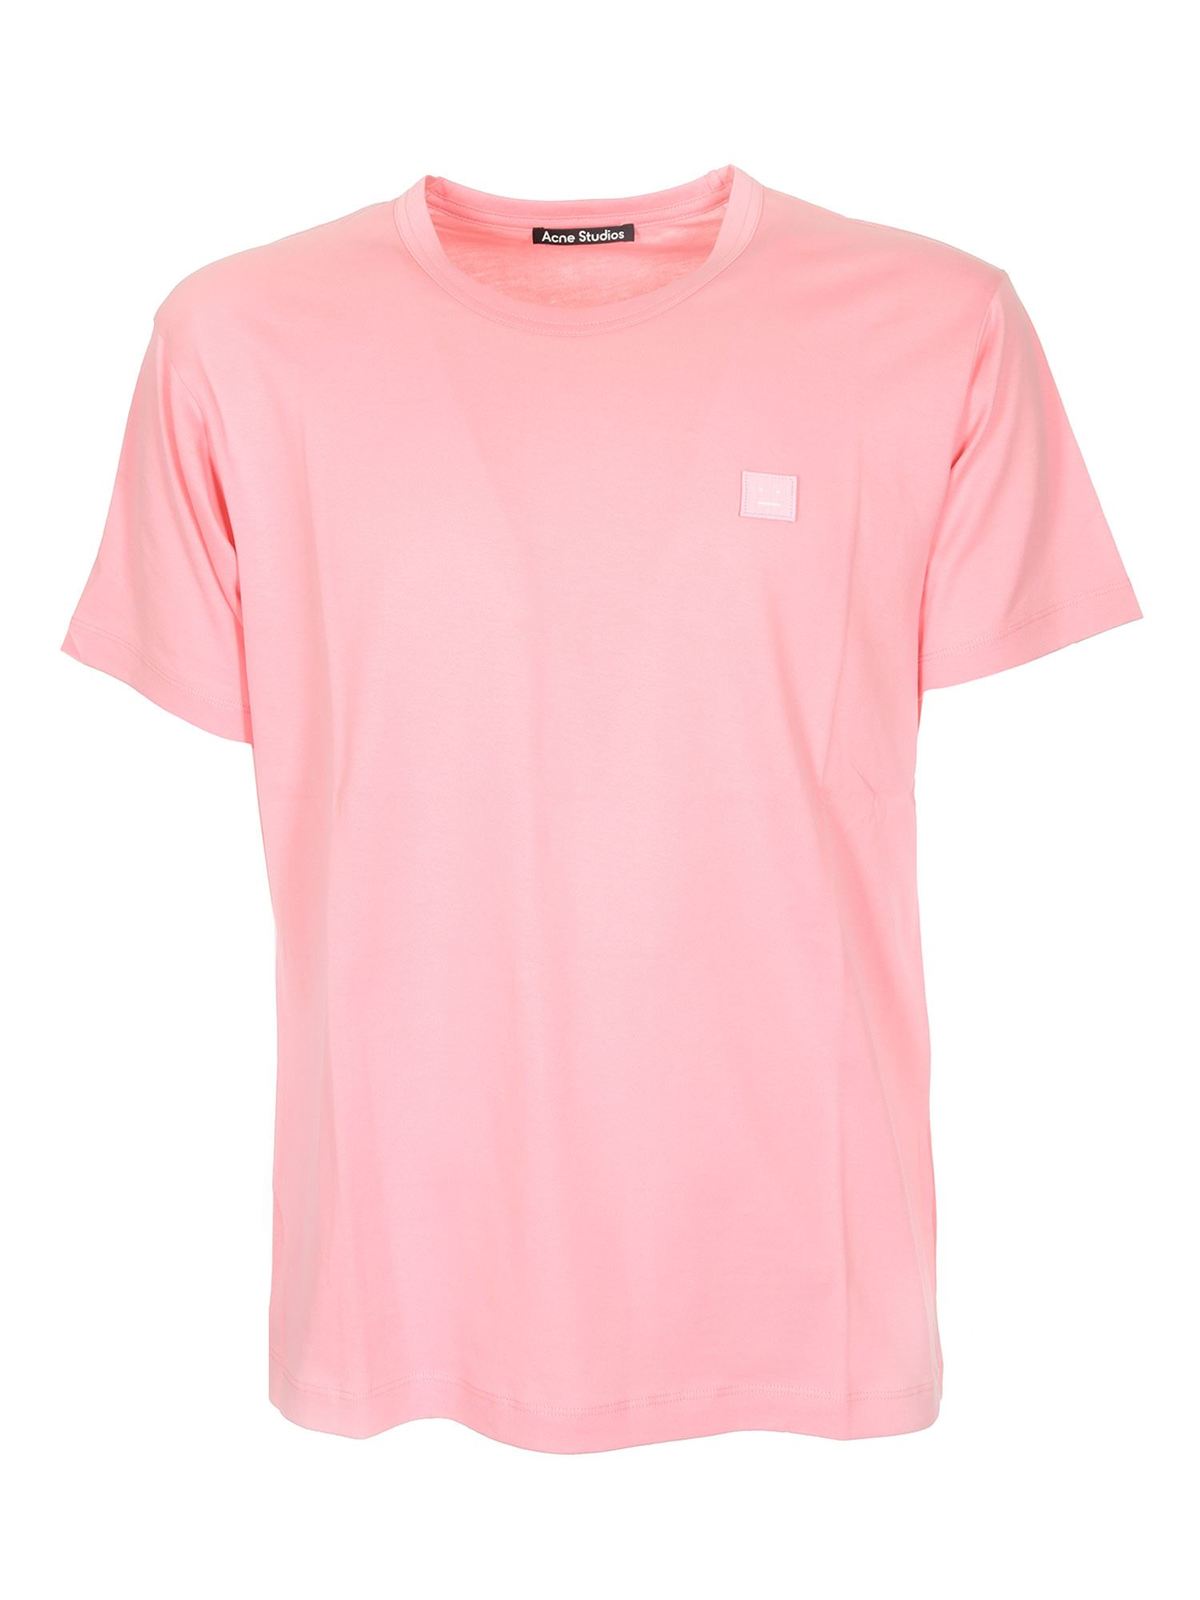 ACNE STUDIOS NASH FACE T-SHIRT IN PINK